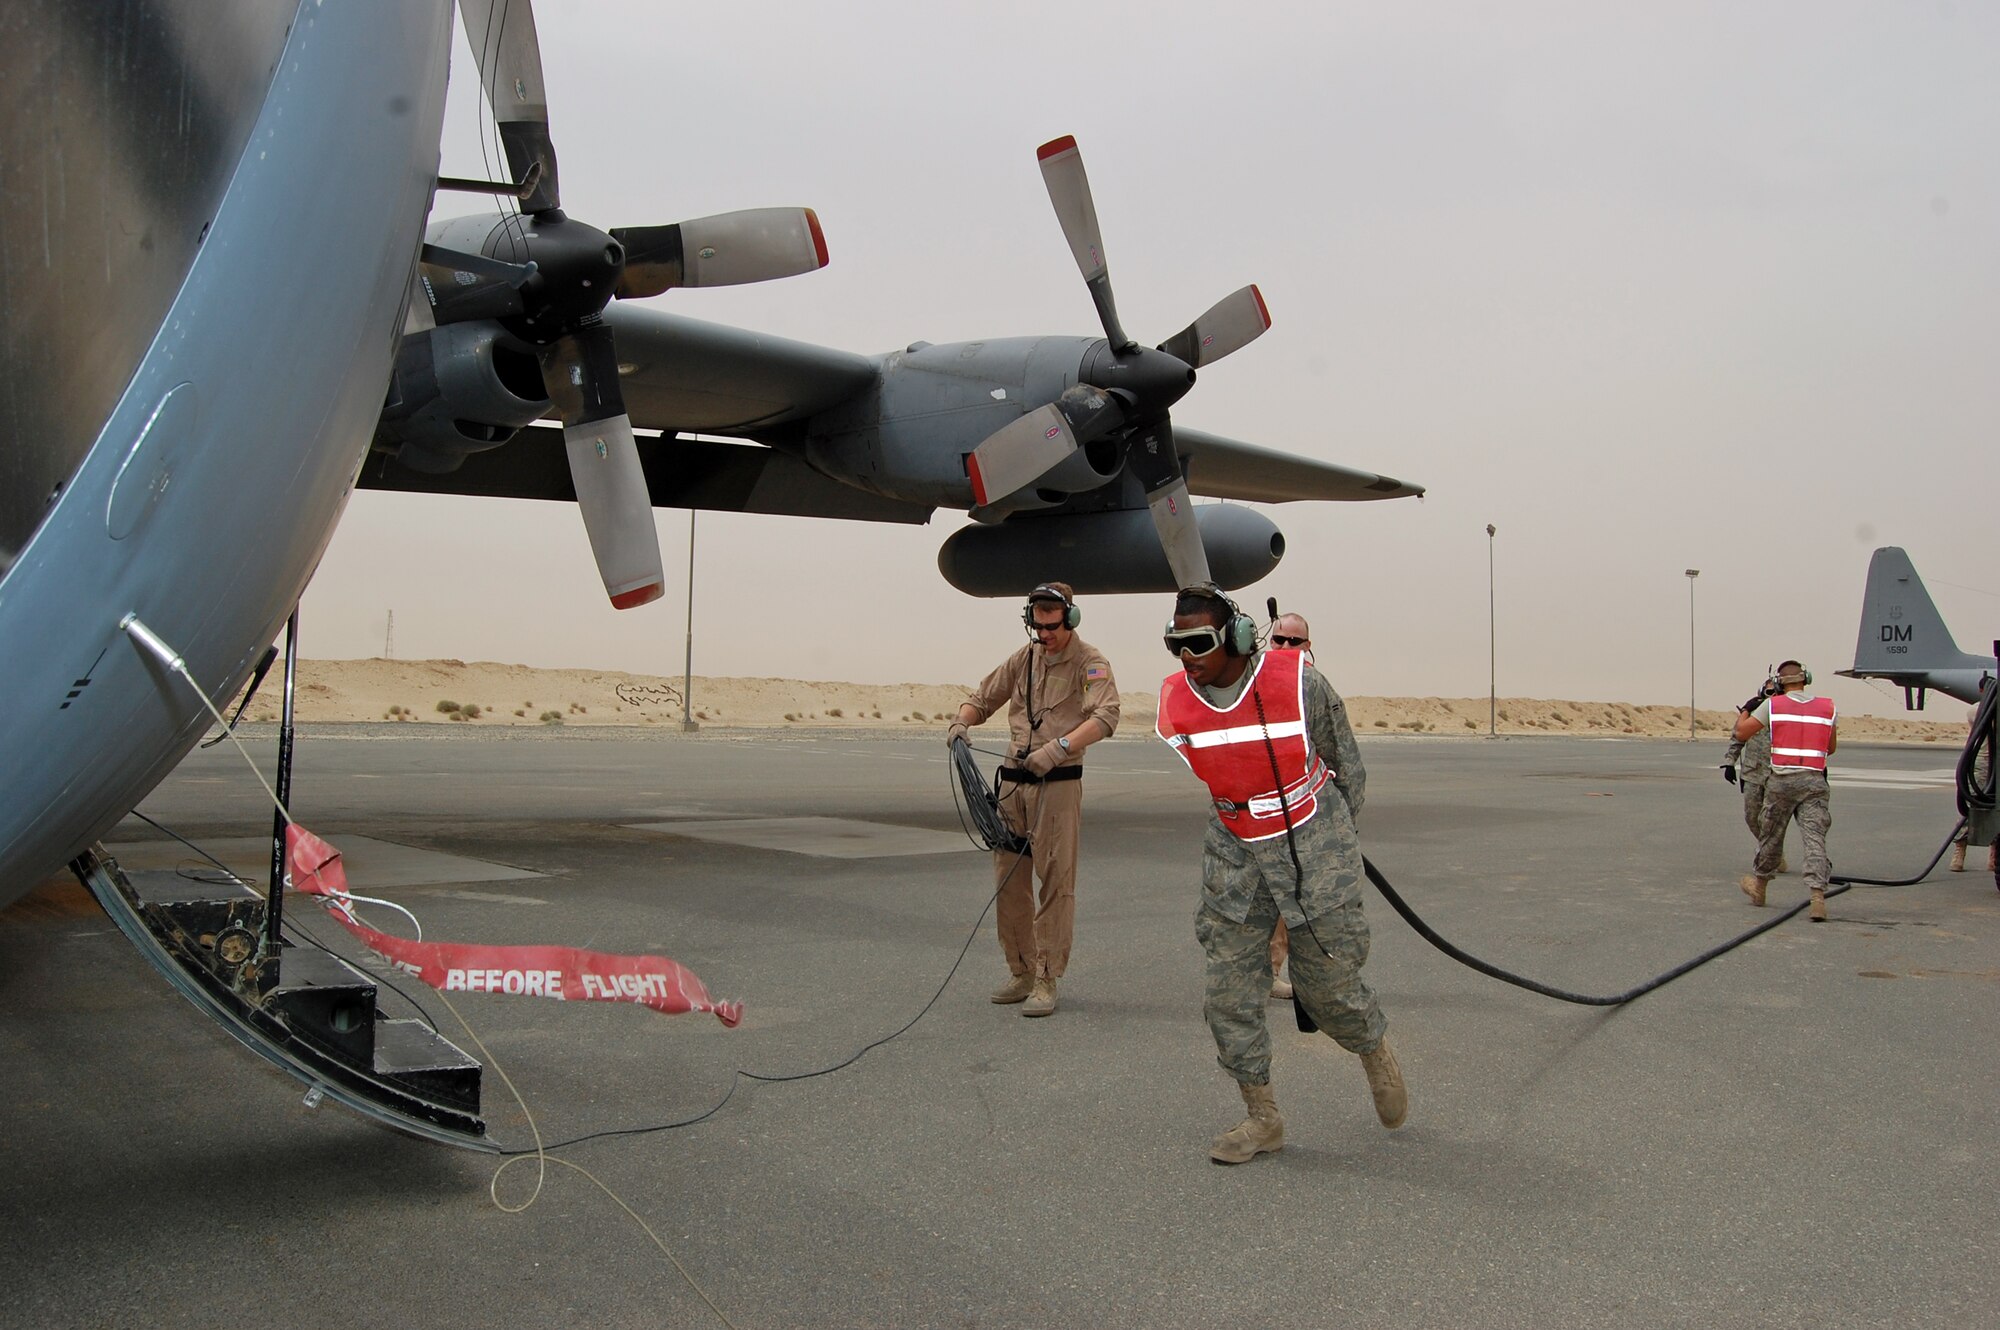 SOUTHWEST ASIA -- Airman 1st Class Rashaud Johnson, a C-130 electronic counter measure specialist deployed with the 386th Expeditionary Aircraft Maintenance Squadron drags an external power source from a maintenance cart to an EC-130H Compass Call aircraft while other aircrew and ground personnel accomplish other aspects of the post-flight inspection at an air base in the Persian Gulf Region March 18, 2008. Airman Johnson is deployed from the 755th AMXS, out of Davis-Monthan Air Force Base, Ariz., supporting the Global War on Terror. (Air Force photo/Tech. Sgt. Michael O’Connor)